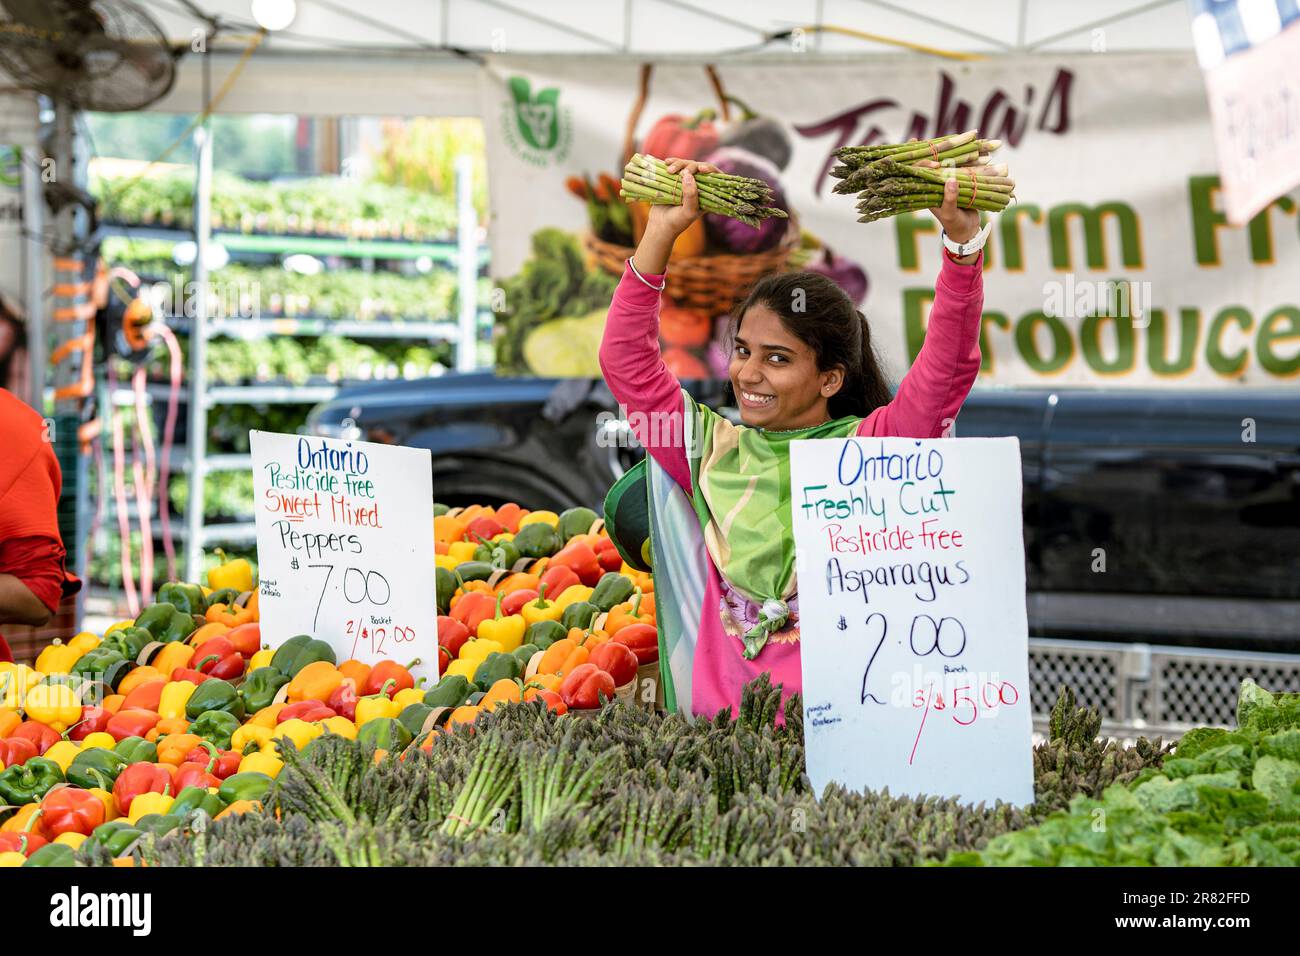 St Jacobs Farmers Market Fruit and Vegetable Vendors, Ontario, Canada Foto Stock